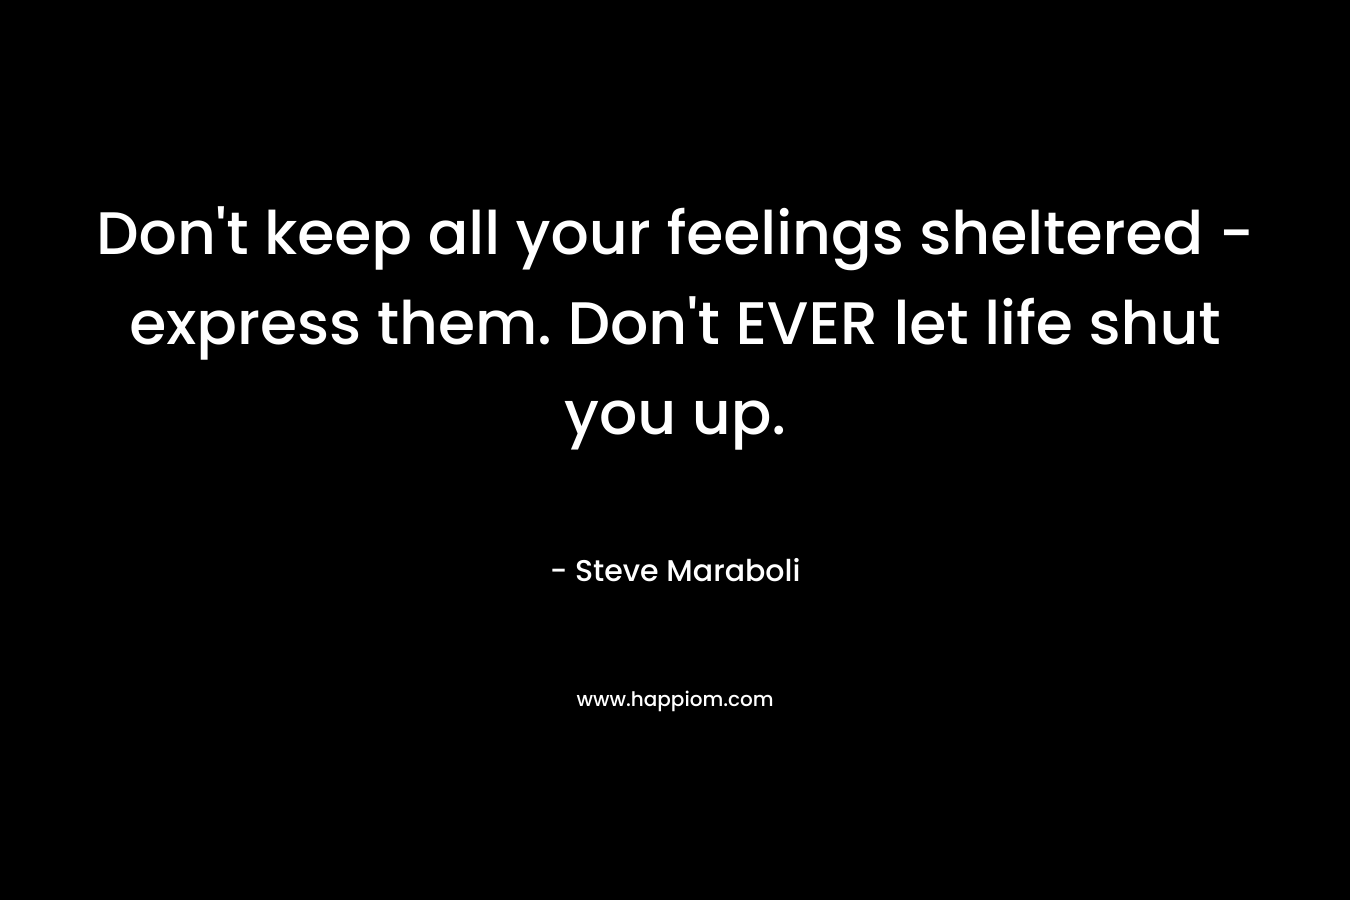 Don't keep all your feelings sheltered - express them. Don't EVER let life shut you up.